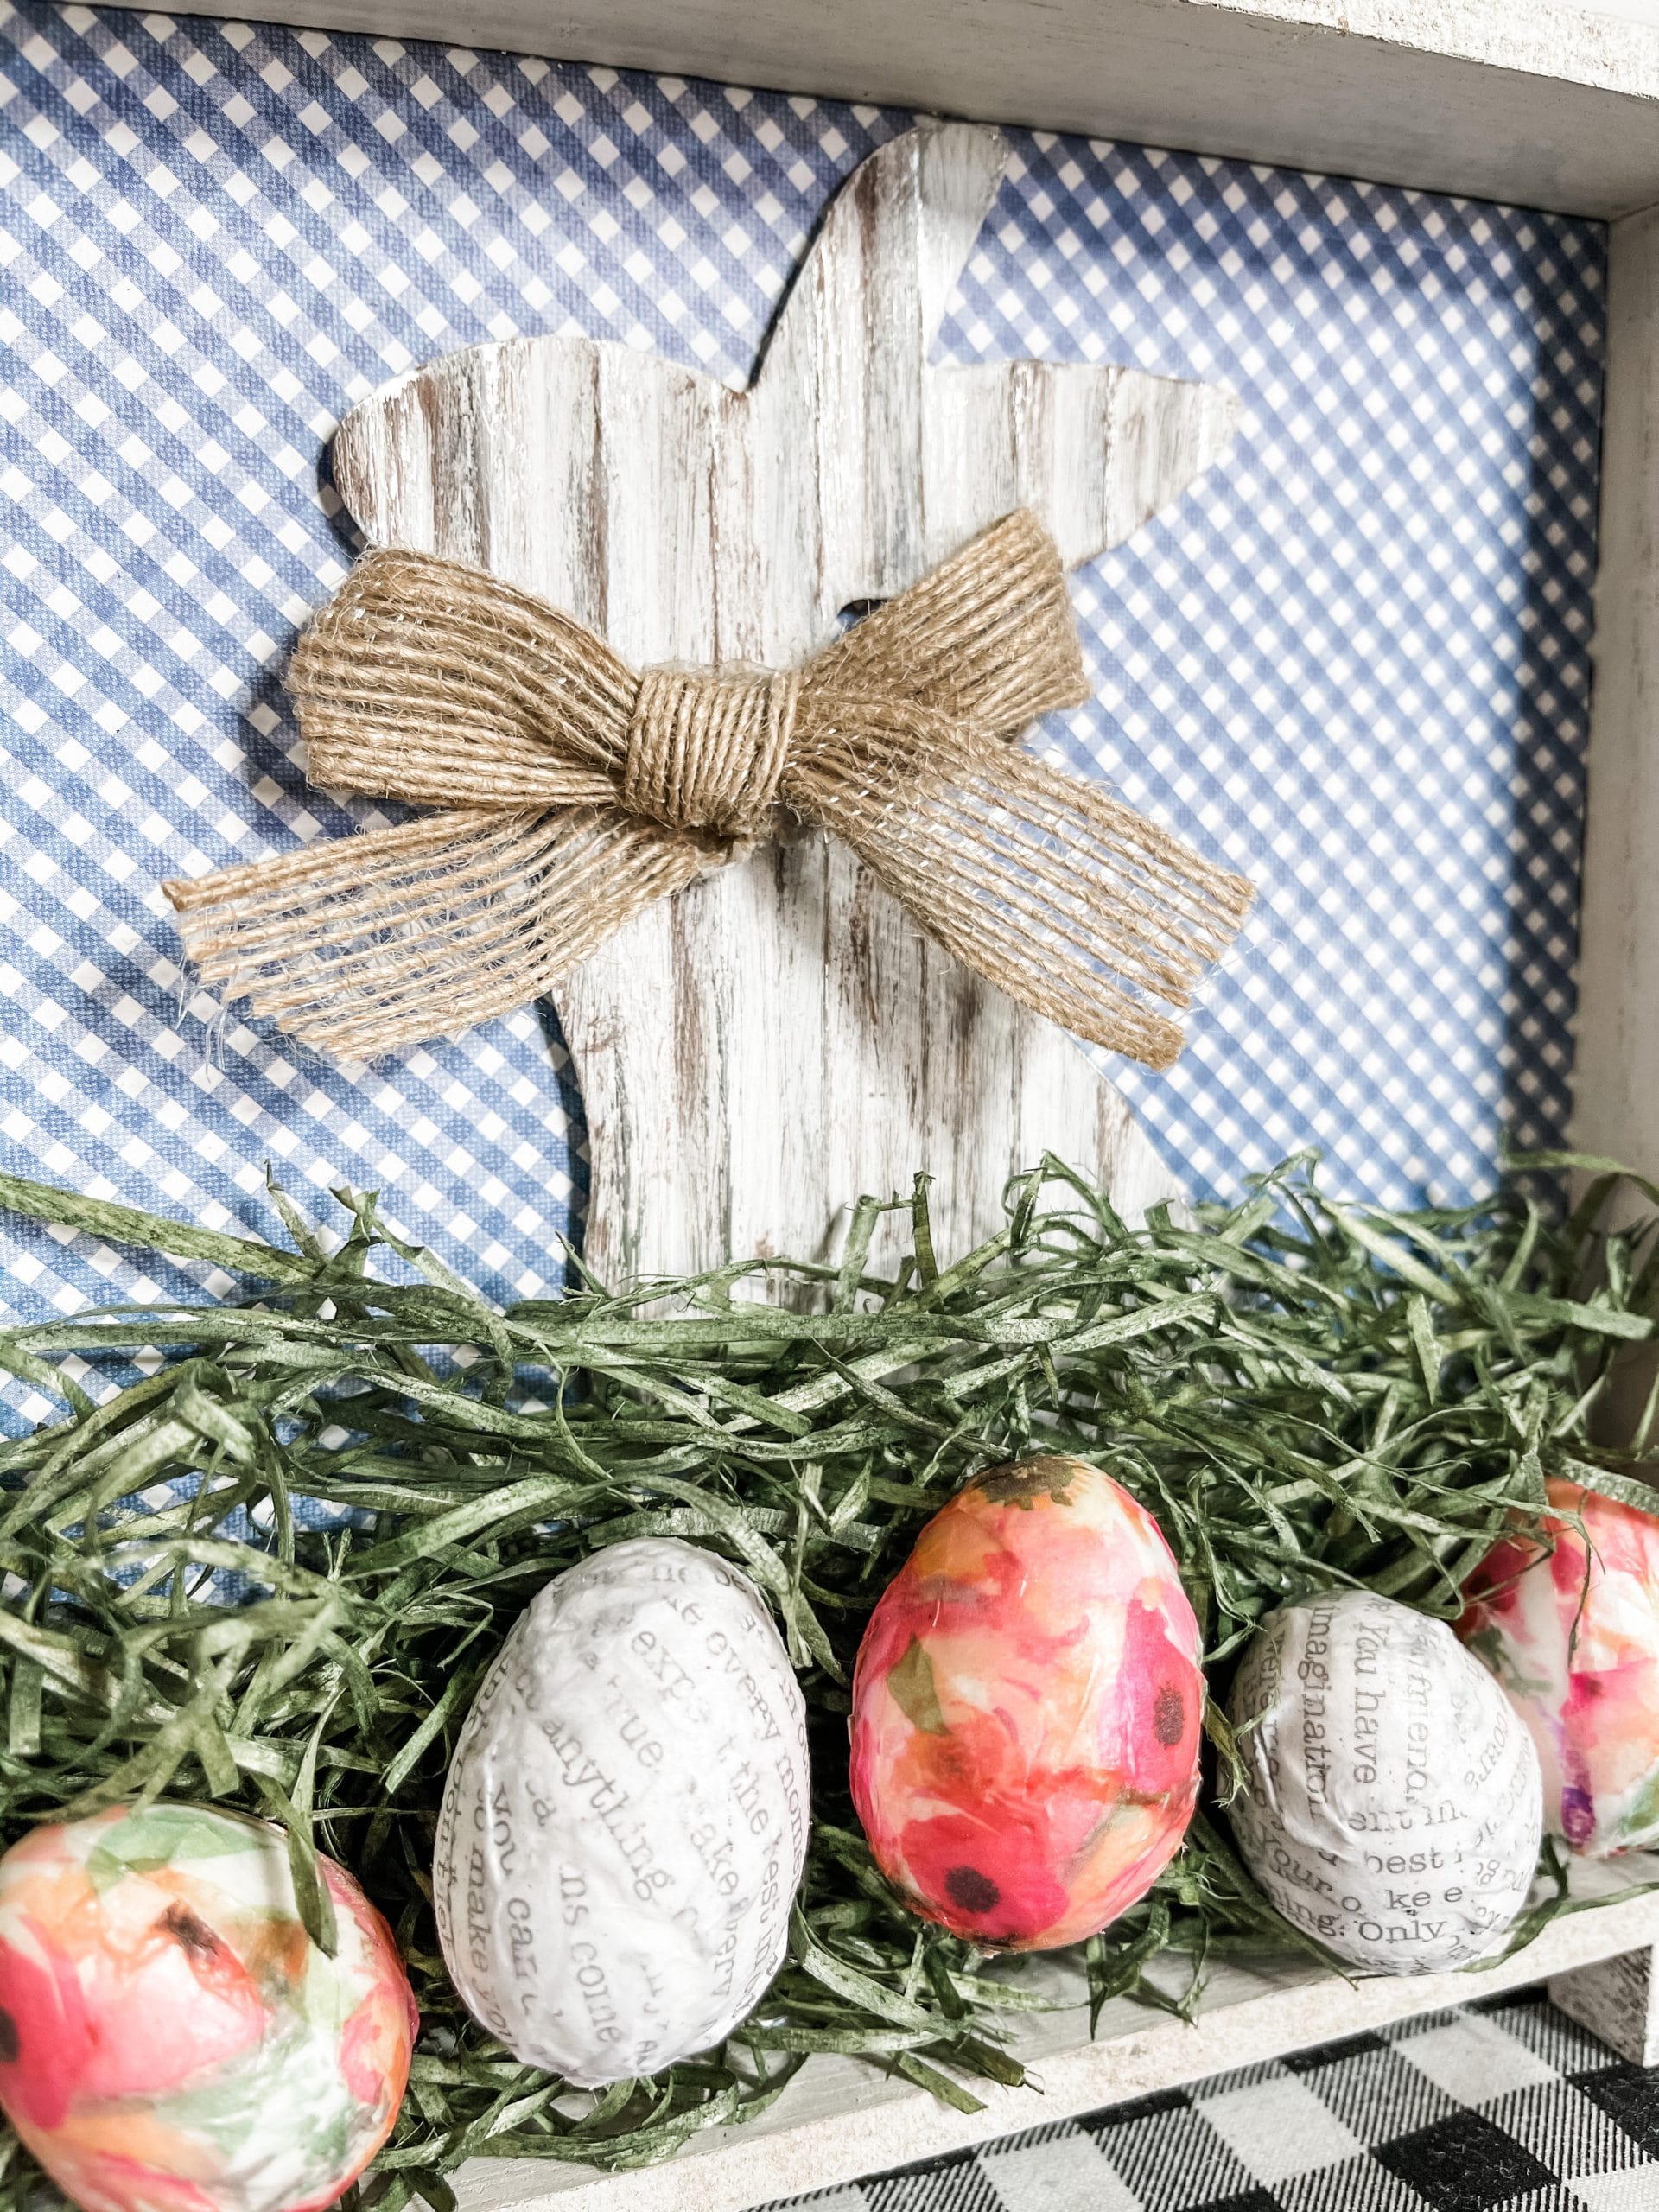 DIY: Upcycled Easter Decorations & Gifts – ecogreenlove